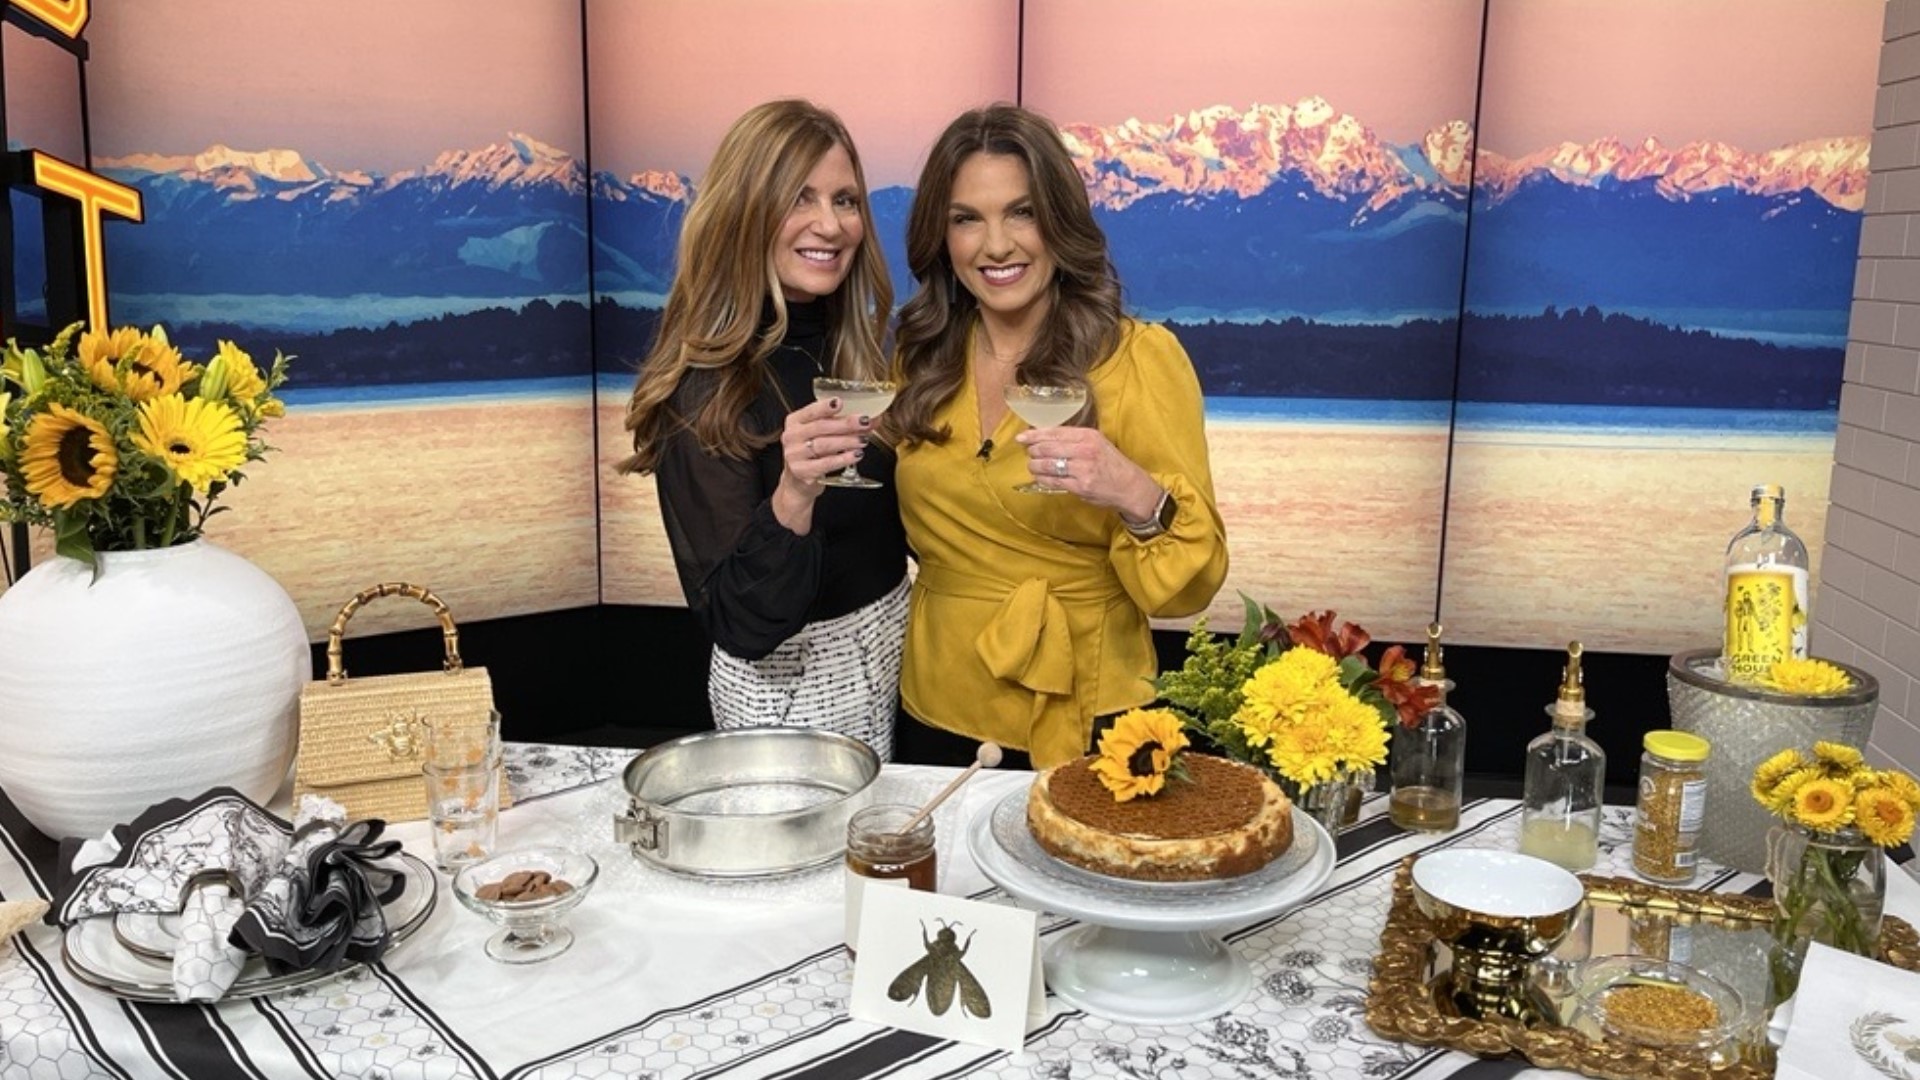 425 Magazine's Monica Hart is new to bee keeping and to celebrate she is throwing a bee-themed party complete with cheesecake and honey martinis with bee pollen.